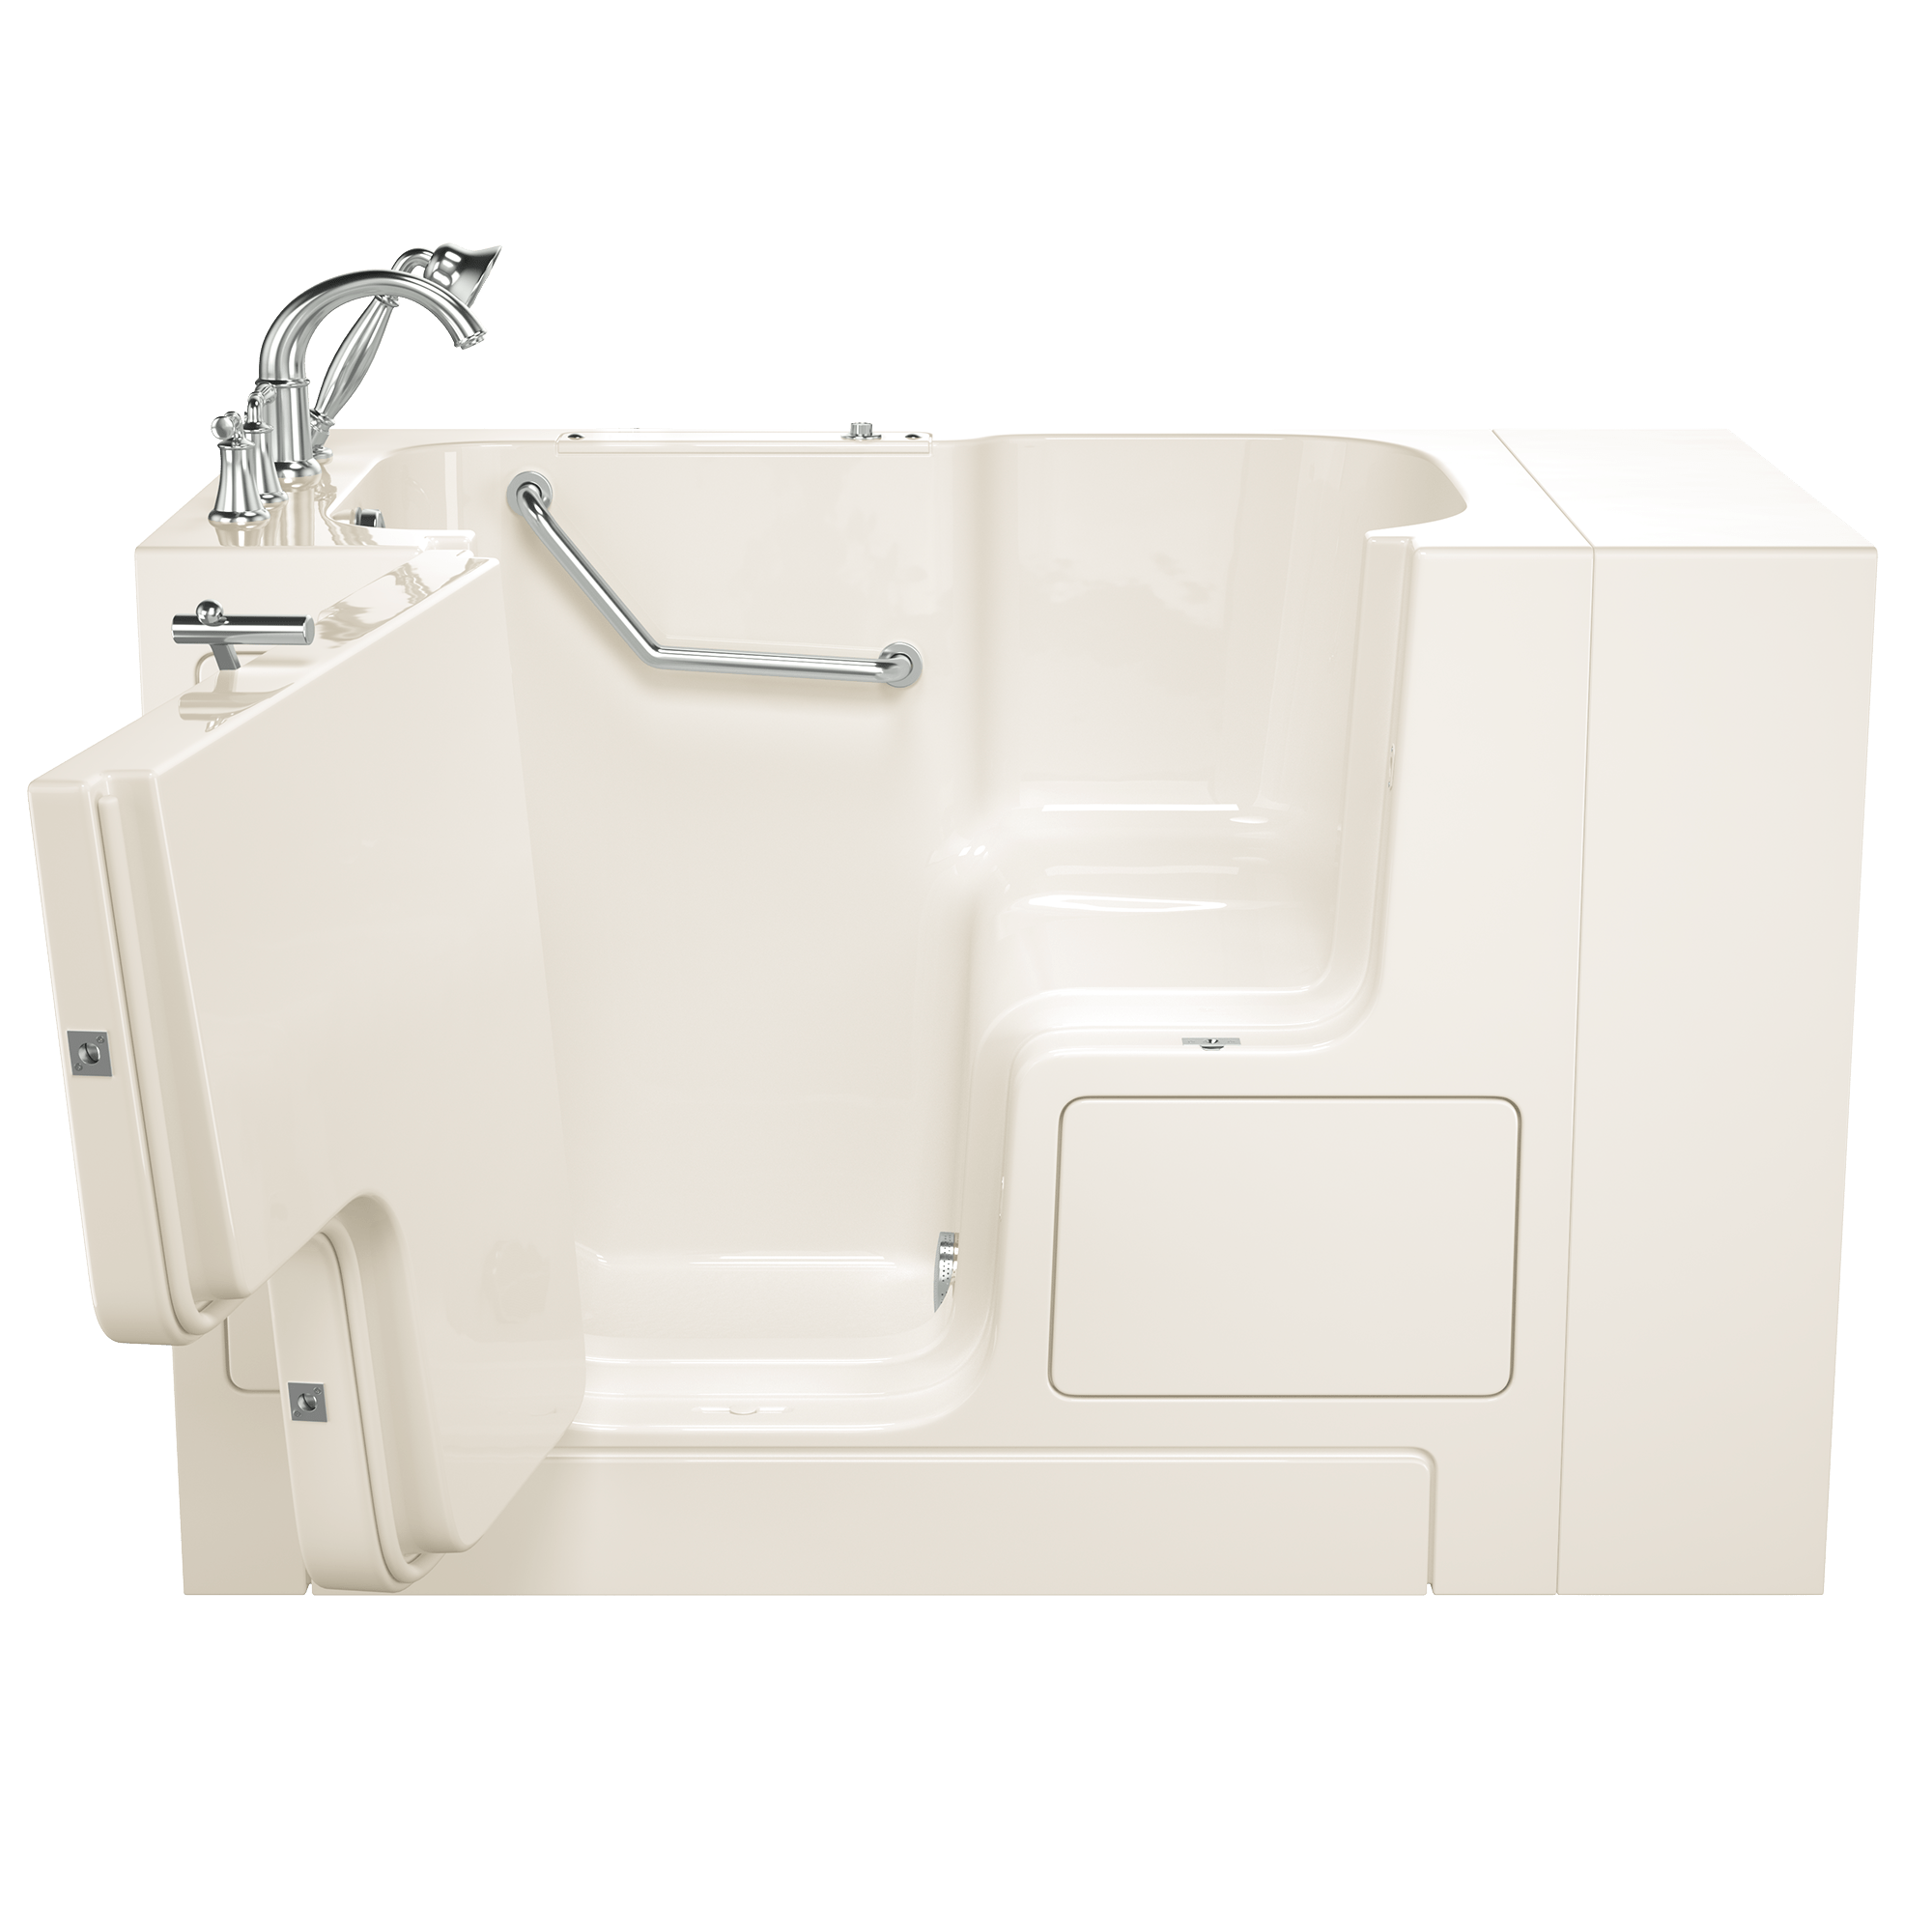 Gelcoat Value Series 32 x 52  Inch Walk in Tub With Soaker System   Left Hand Drain With Faucet WIB LINEN